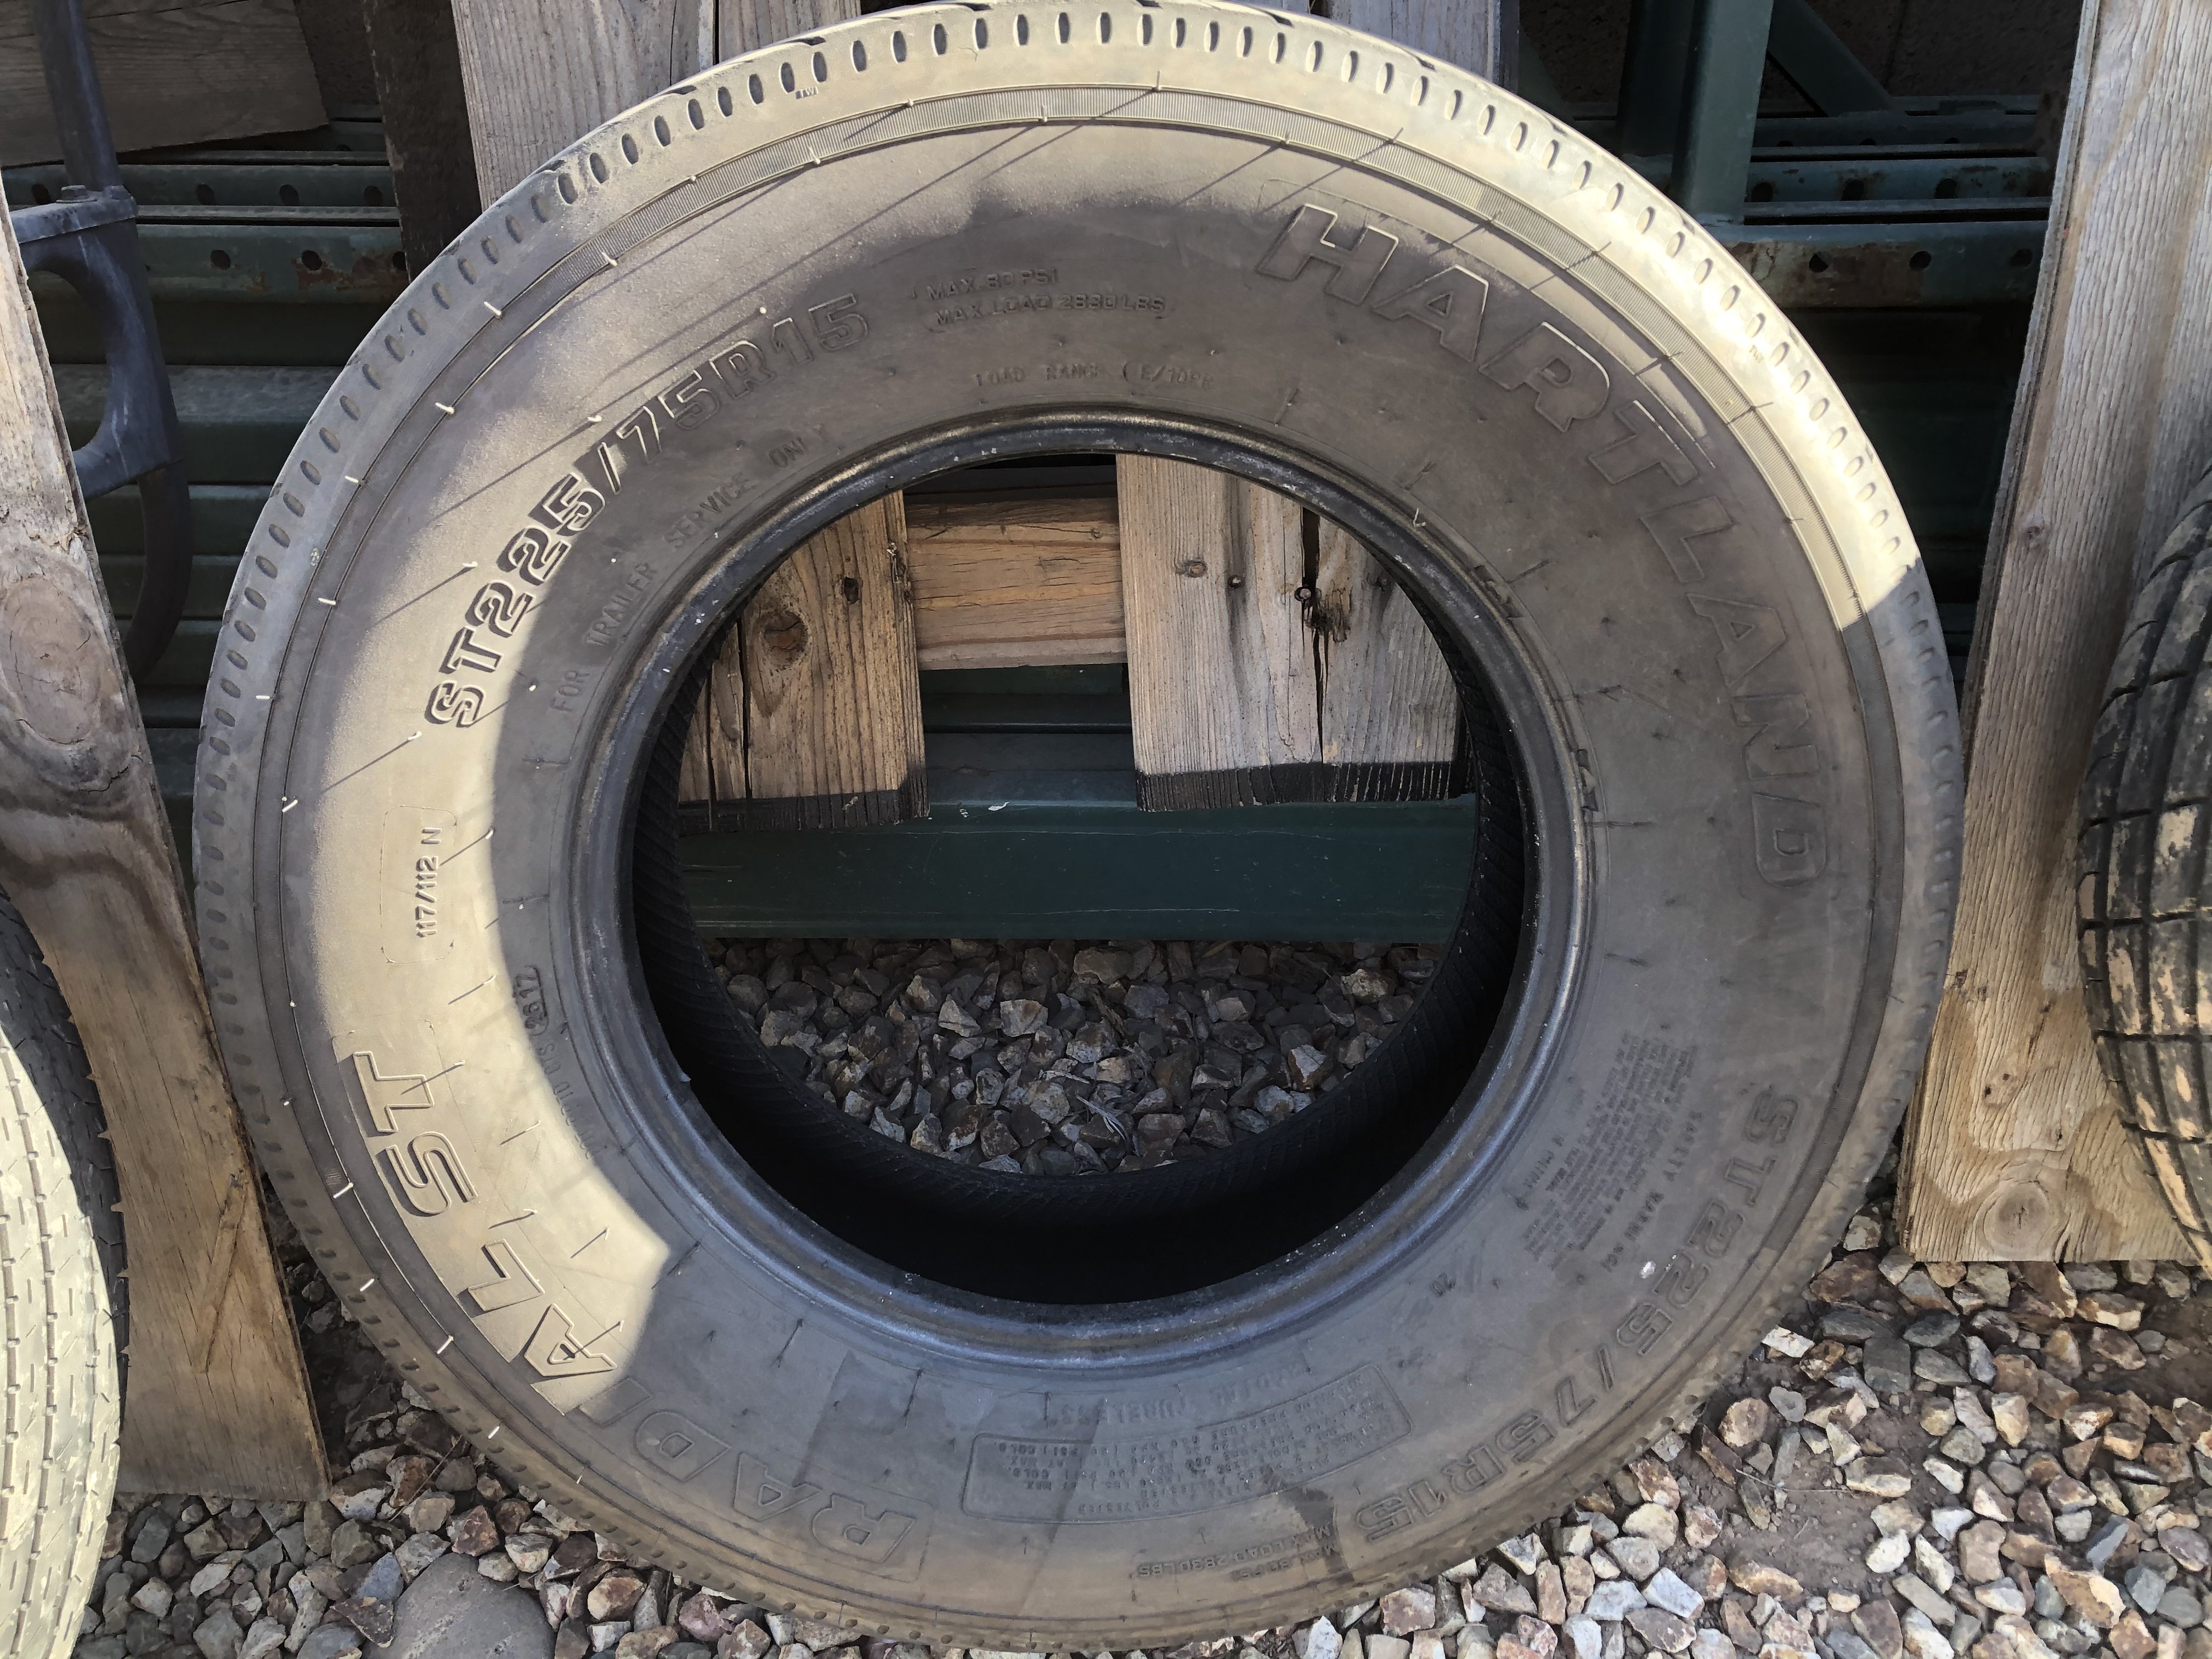 Used tires for sale - Classified Ads - CouesWhitetail.com Discussion forum